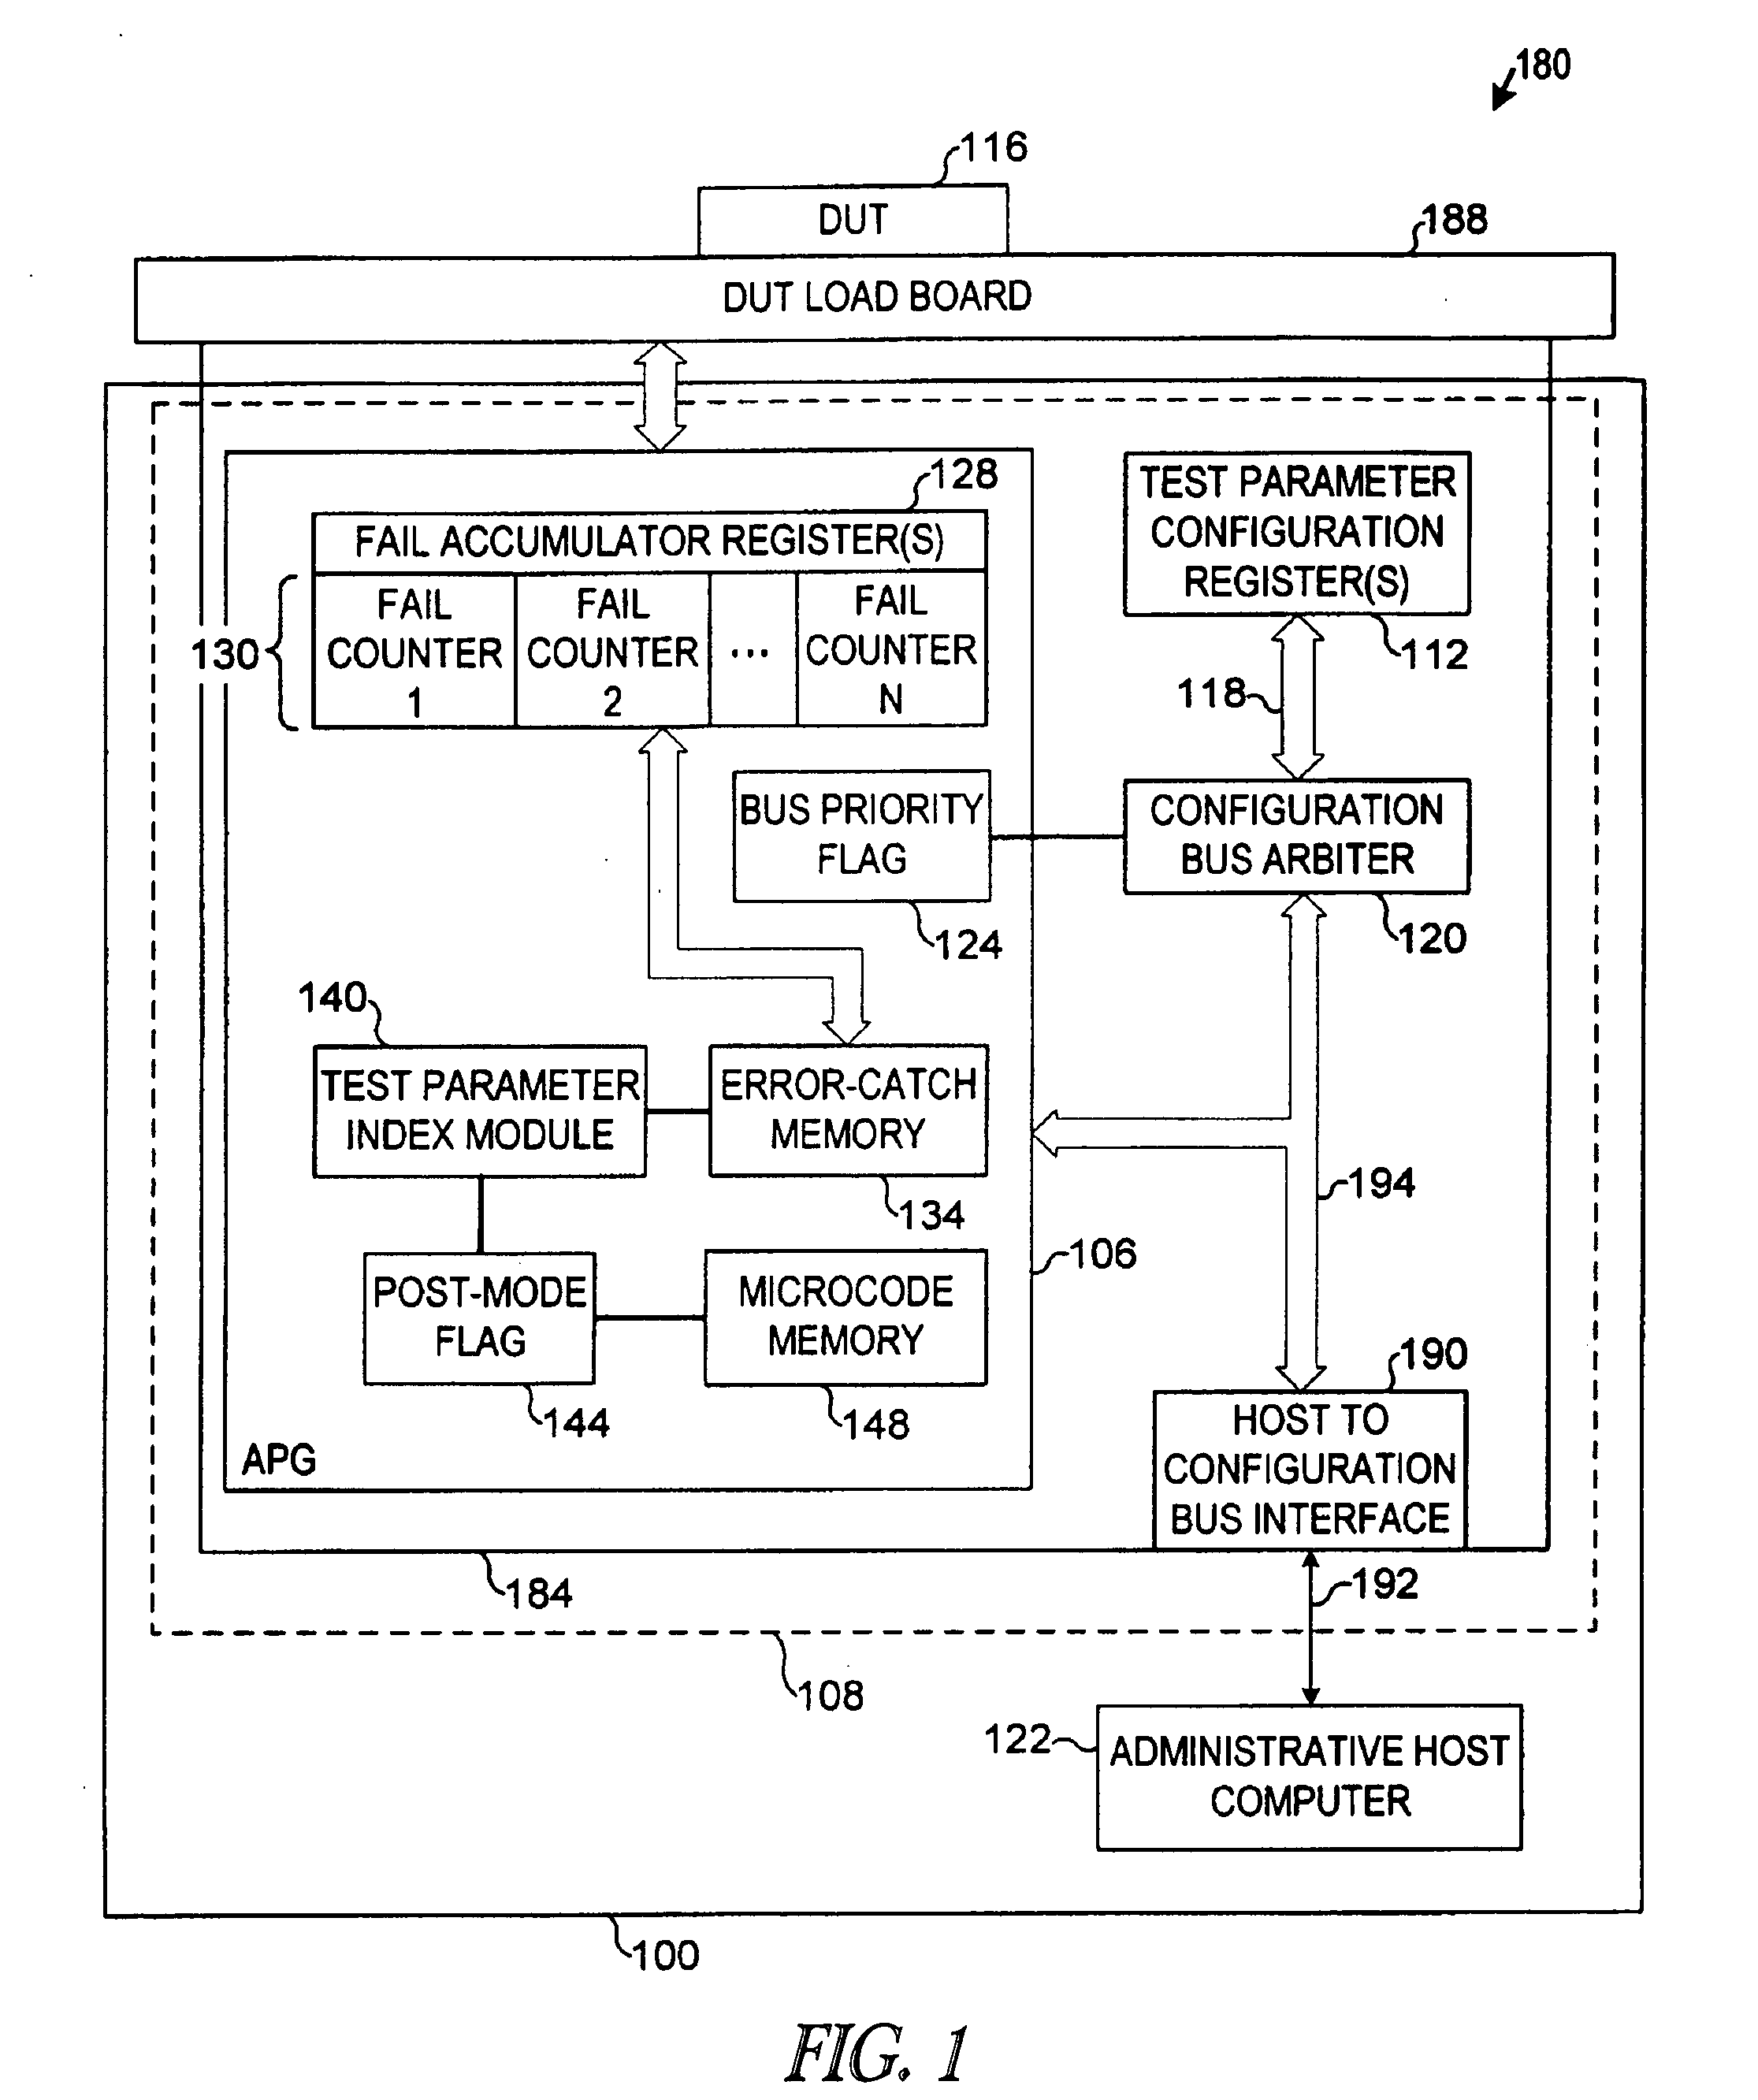 Integrated testing apparatus, systems, and methods